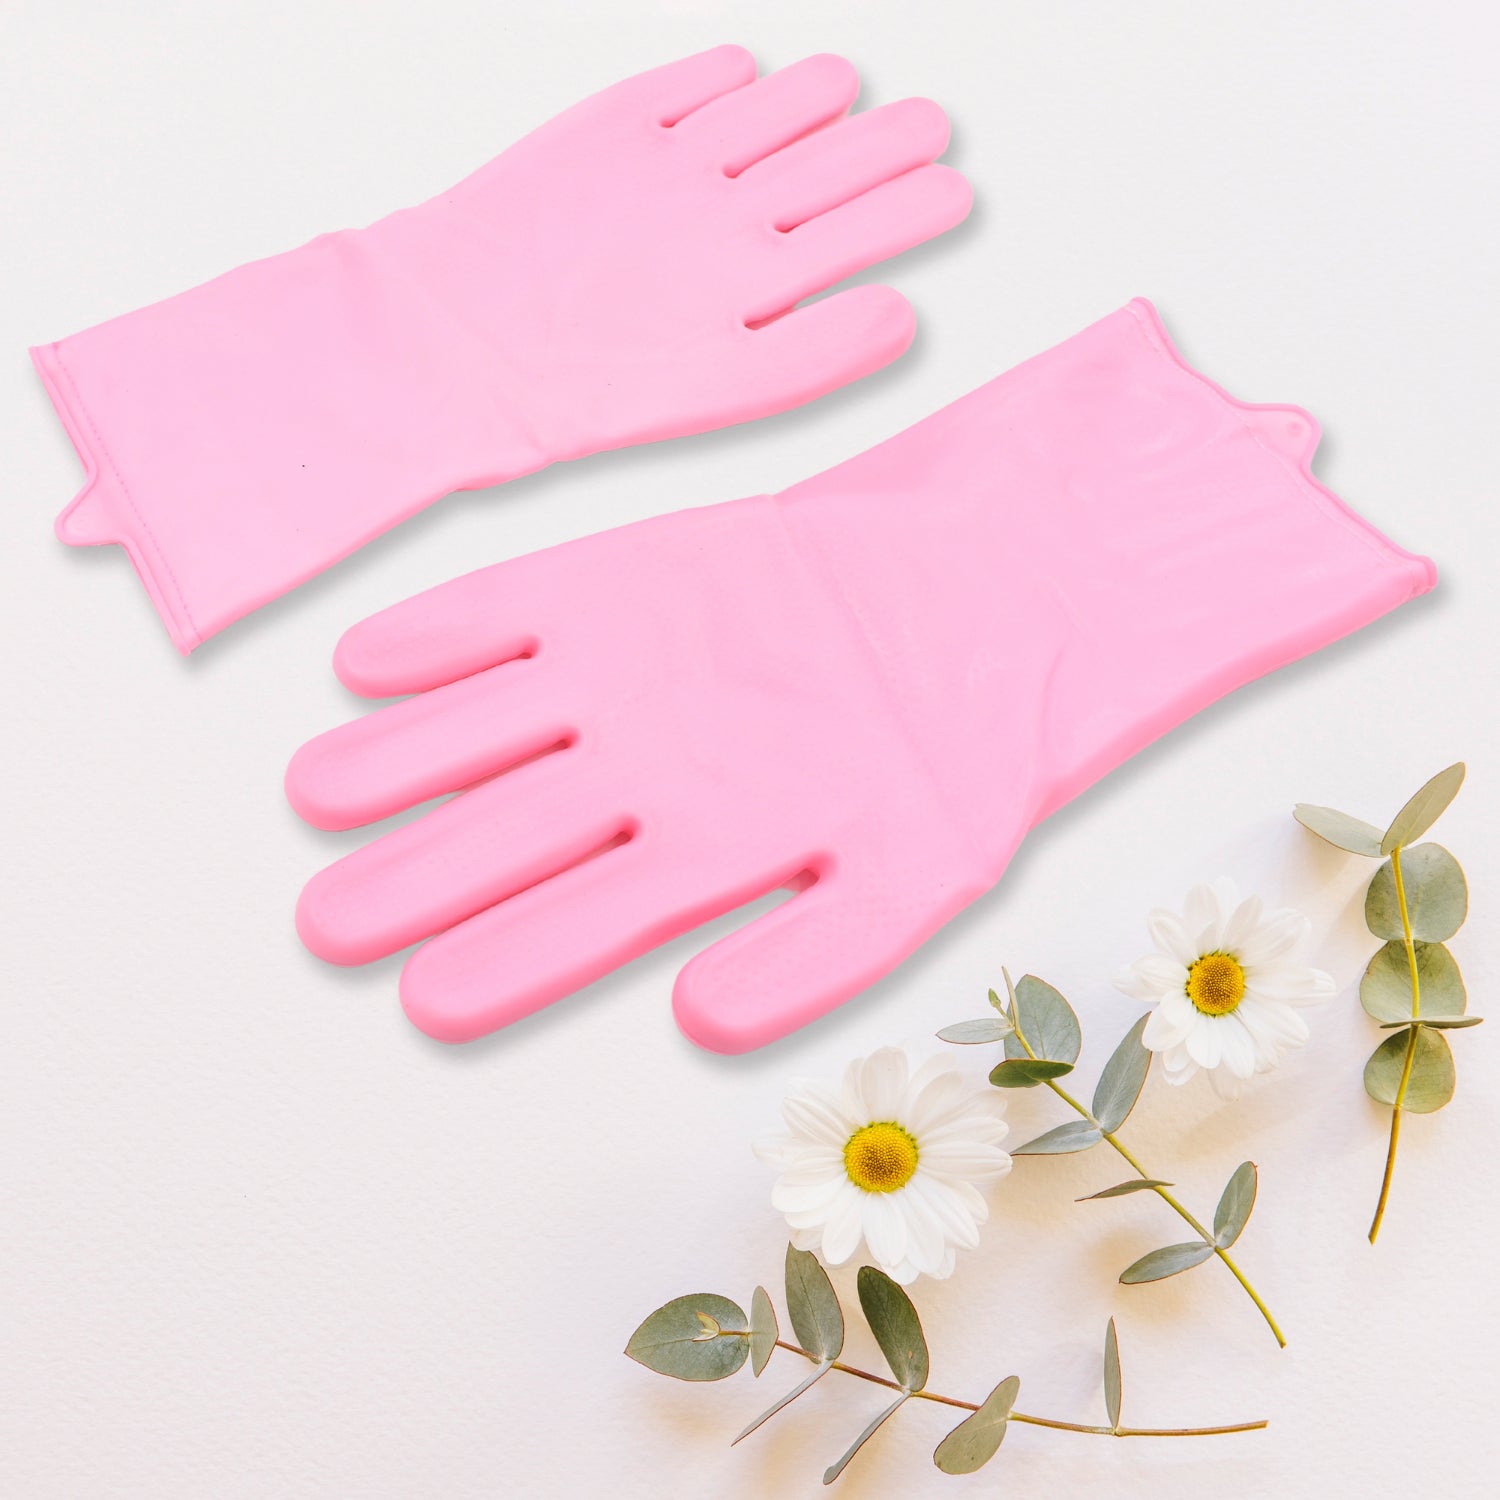 8740 Dishwashing Gloves with Scrubber| Silicone Cleaning Reusable Scrub Gloves for Wash Dish Kitchen| Bathroom| Pet Grooming Wet and Dry Glove (1 Pair, 155Gm)